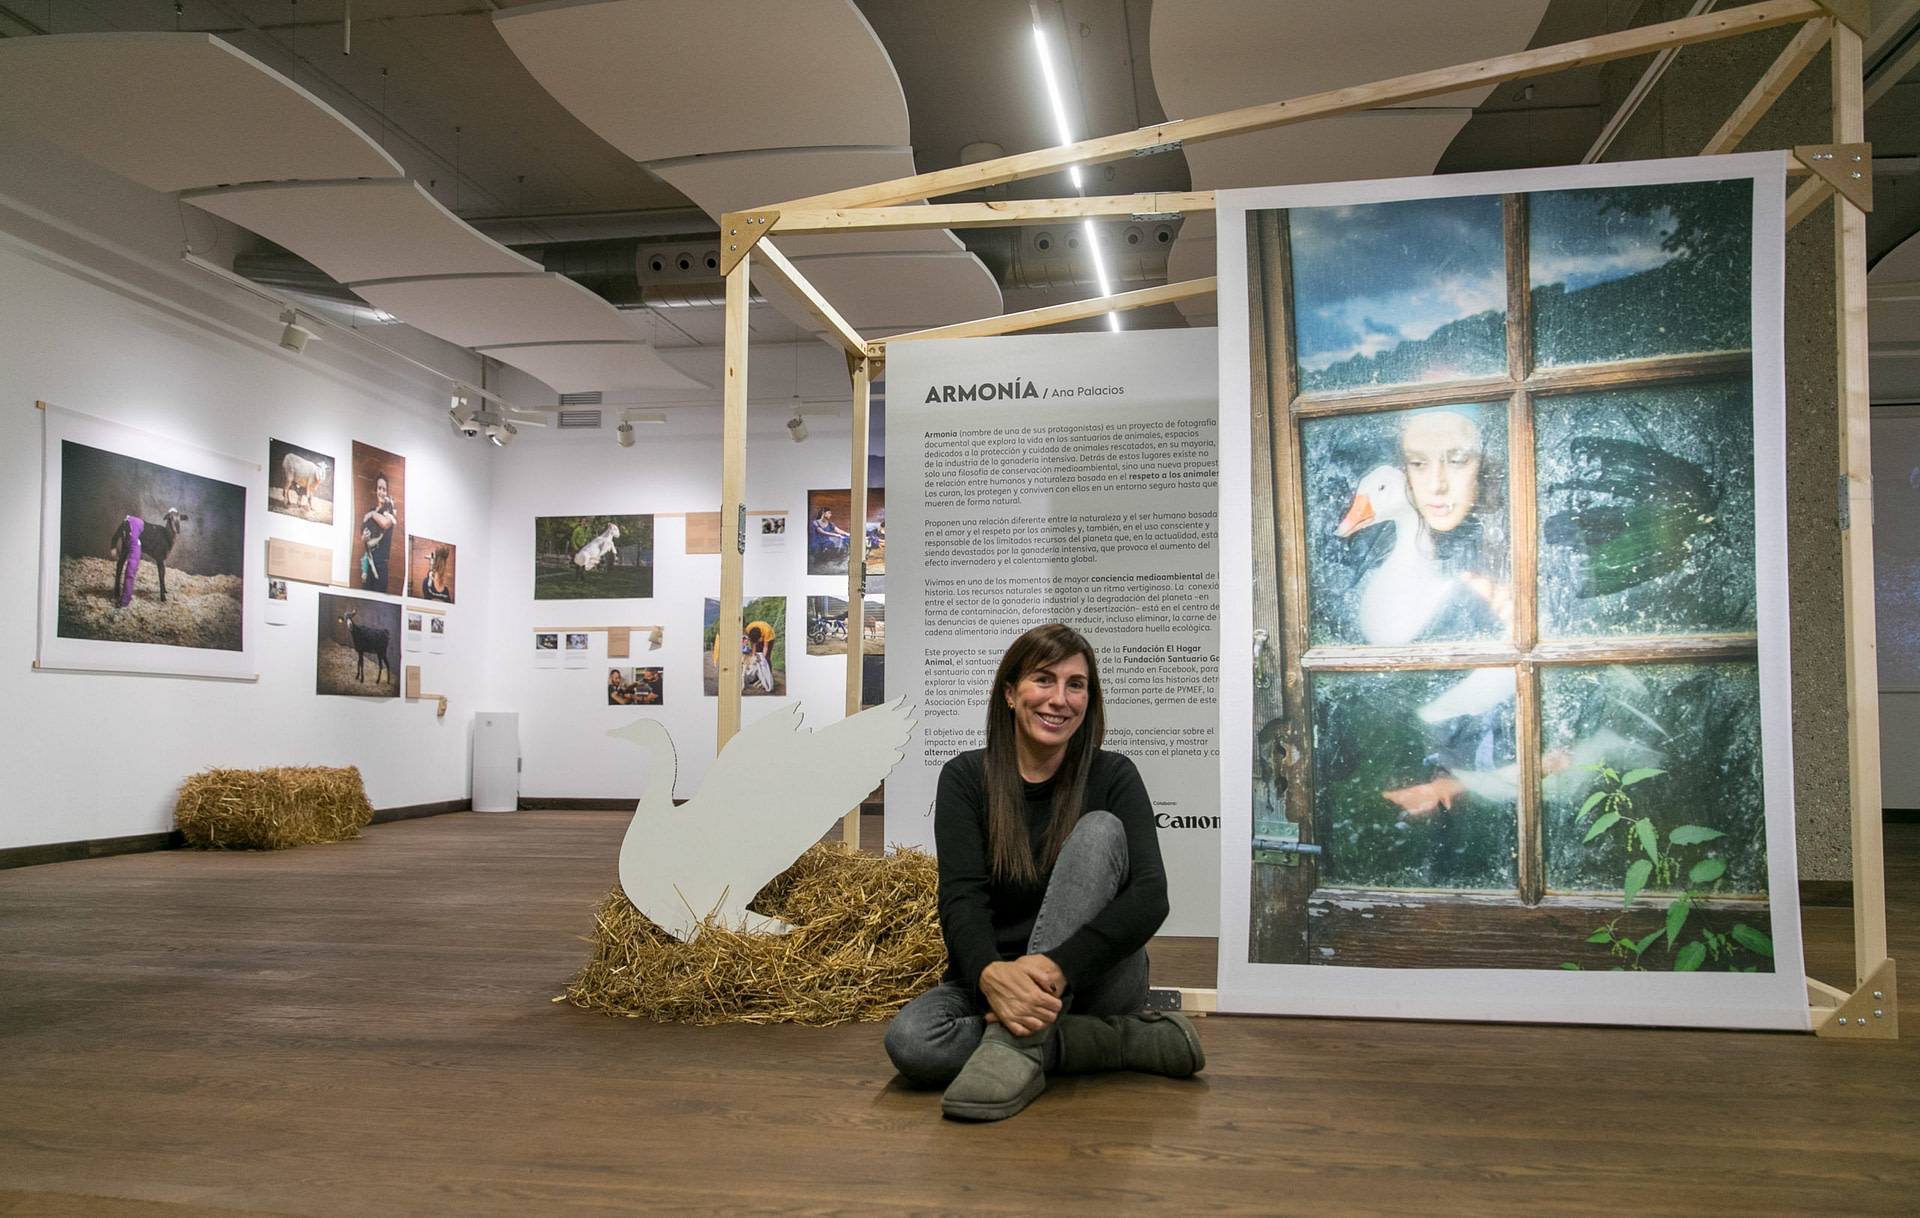 Photojournalist Ana Palacios with her exhibition "Armonia" in Zaragoza, which explores life in animal sanctuaries, spaces dedicated to the protection and care of animals rescued, mostly from the intensive livestock industry. Photo credit: EFE/Javier Cebollada